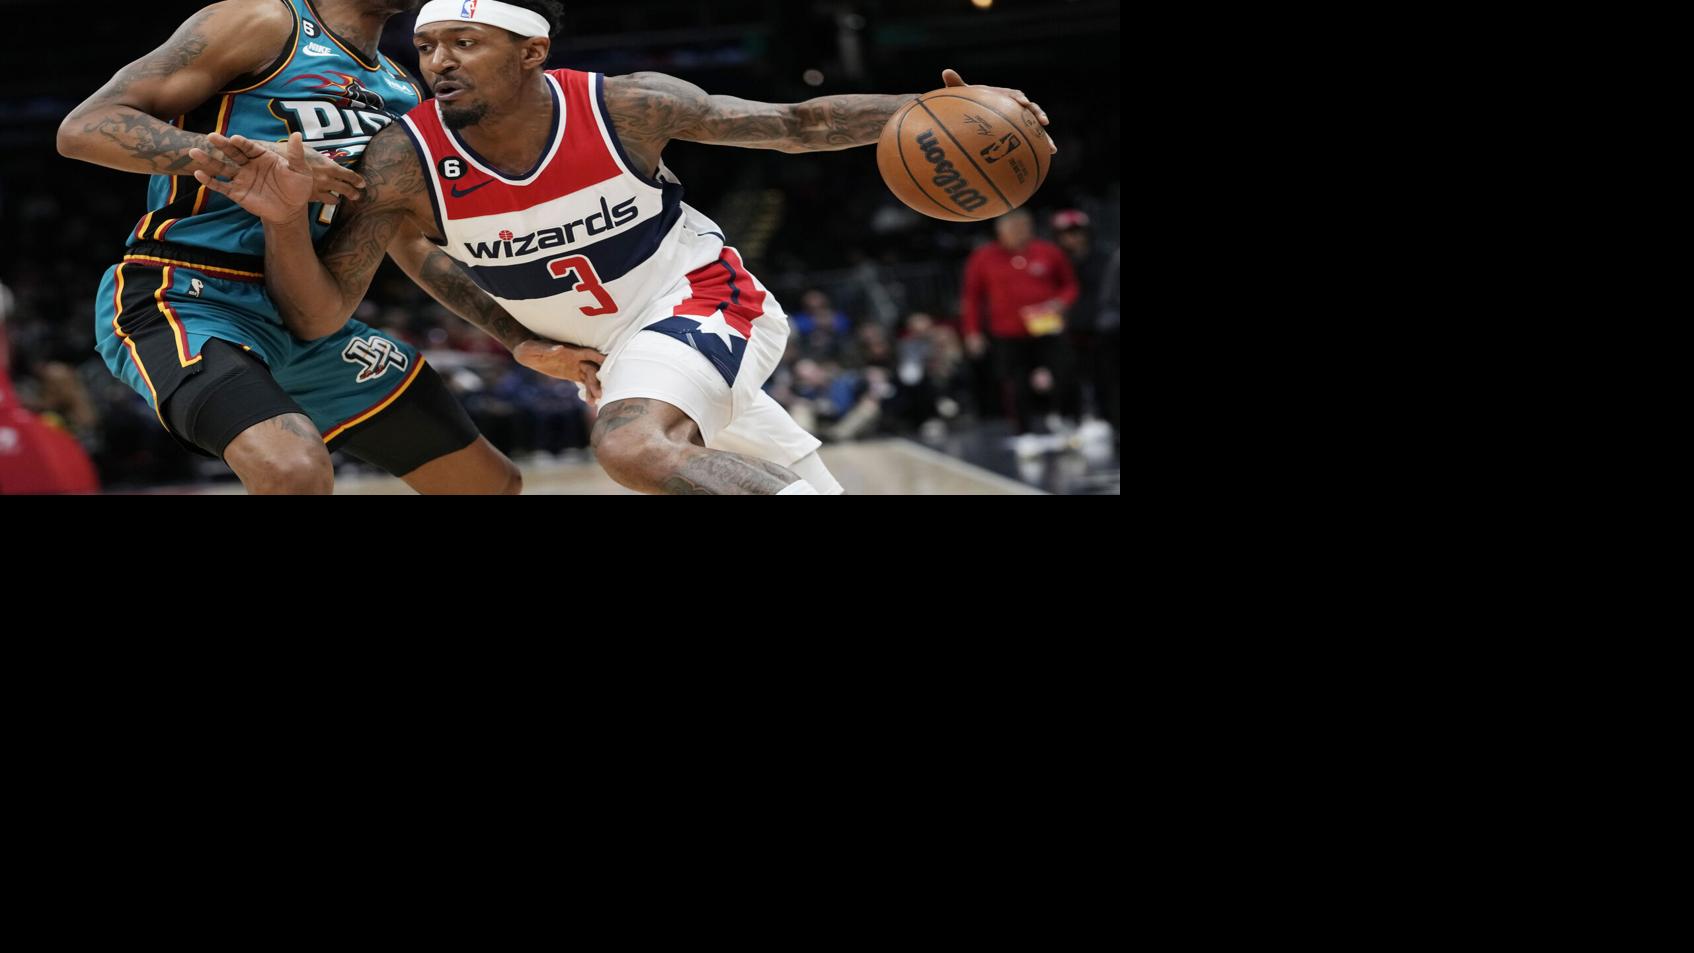 Beal miffed at questions about his future with Wizards